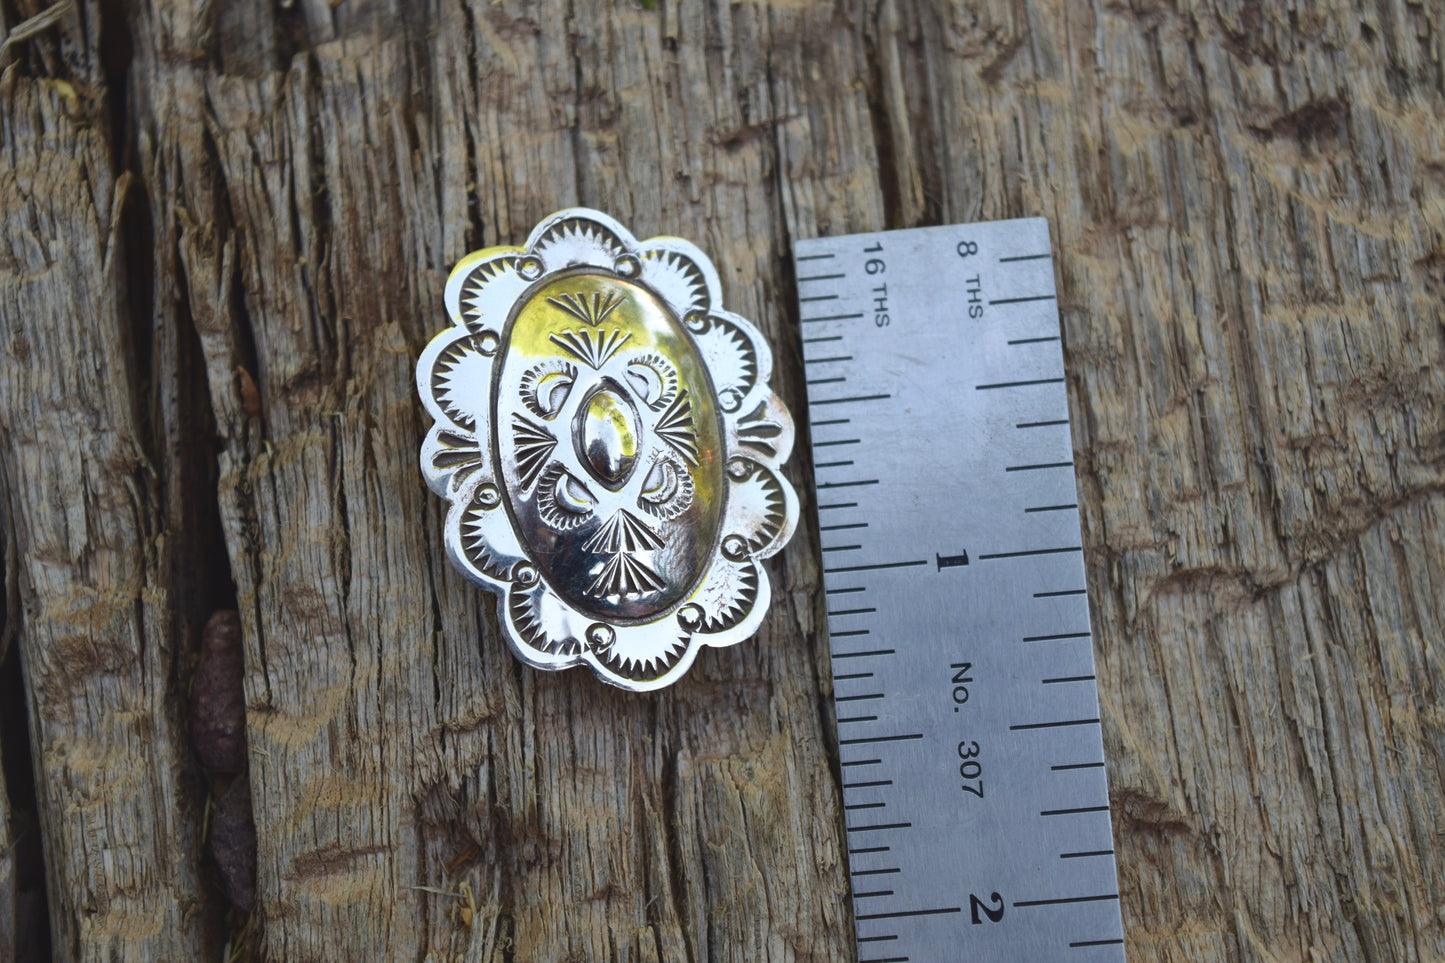 VINTAGE STAMPED CONCHO PINS FROM THE RODGERS COLLECTION